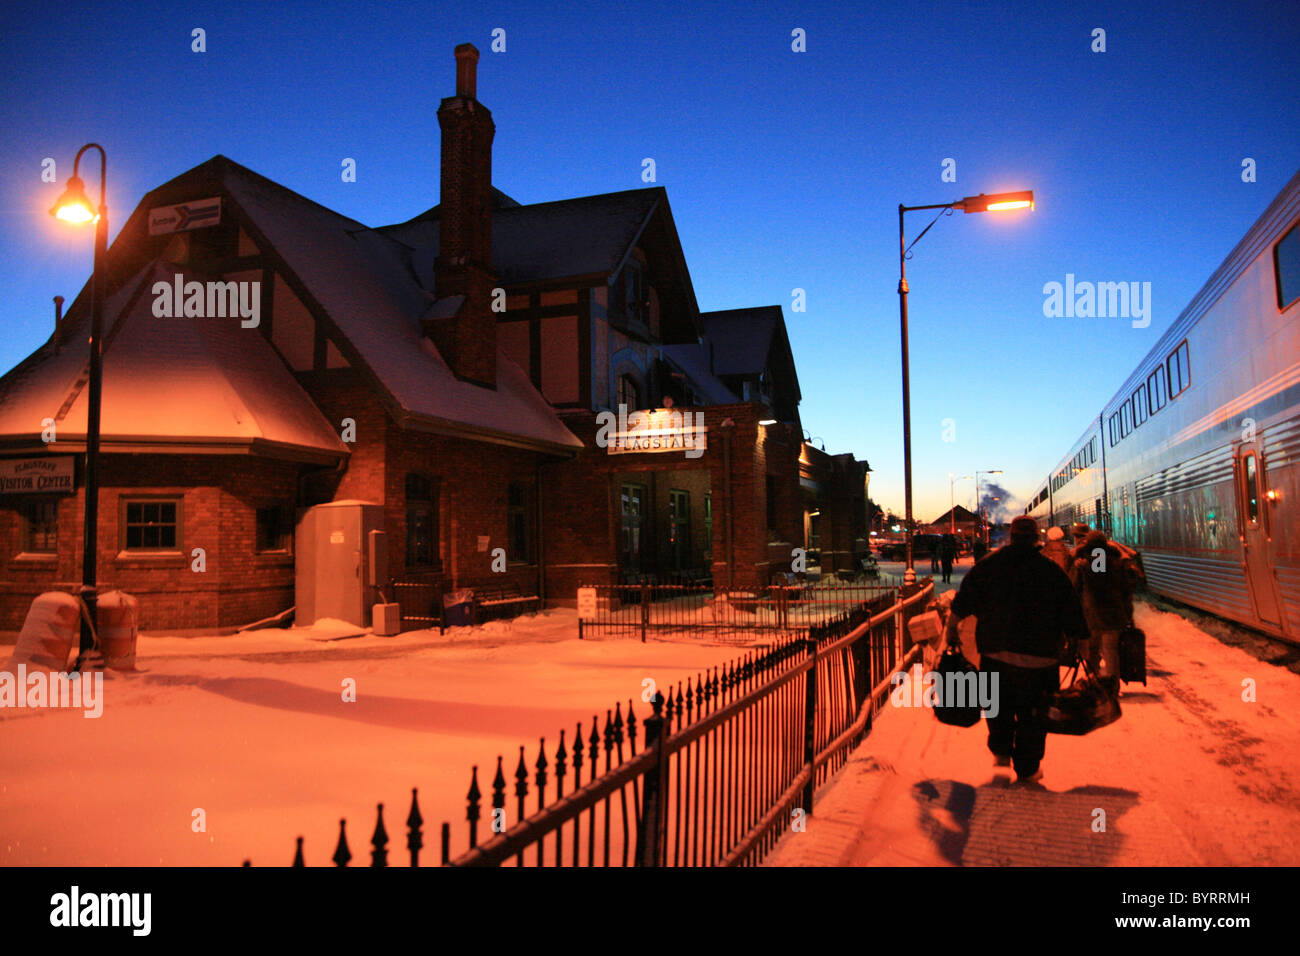 An Amtrak train stops at the Flagstaff Train Station early one winter morning before sunrise. Stock Photo